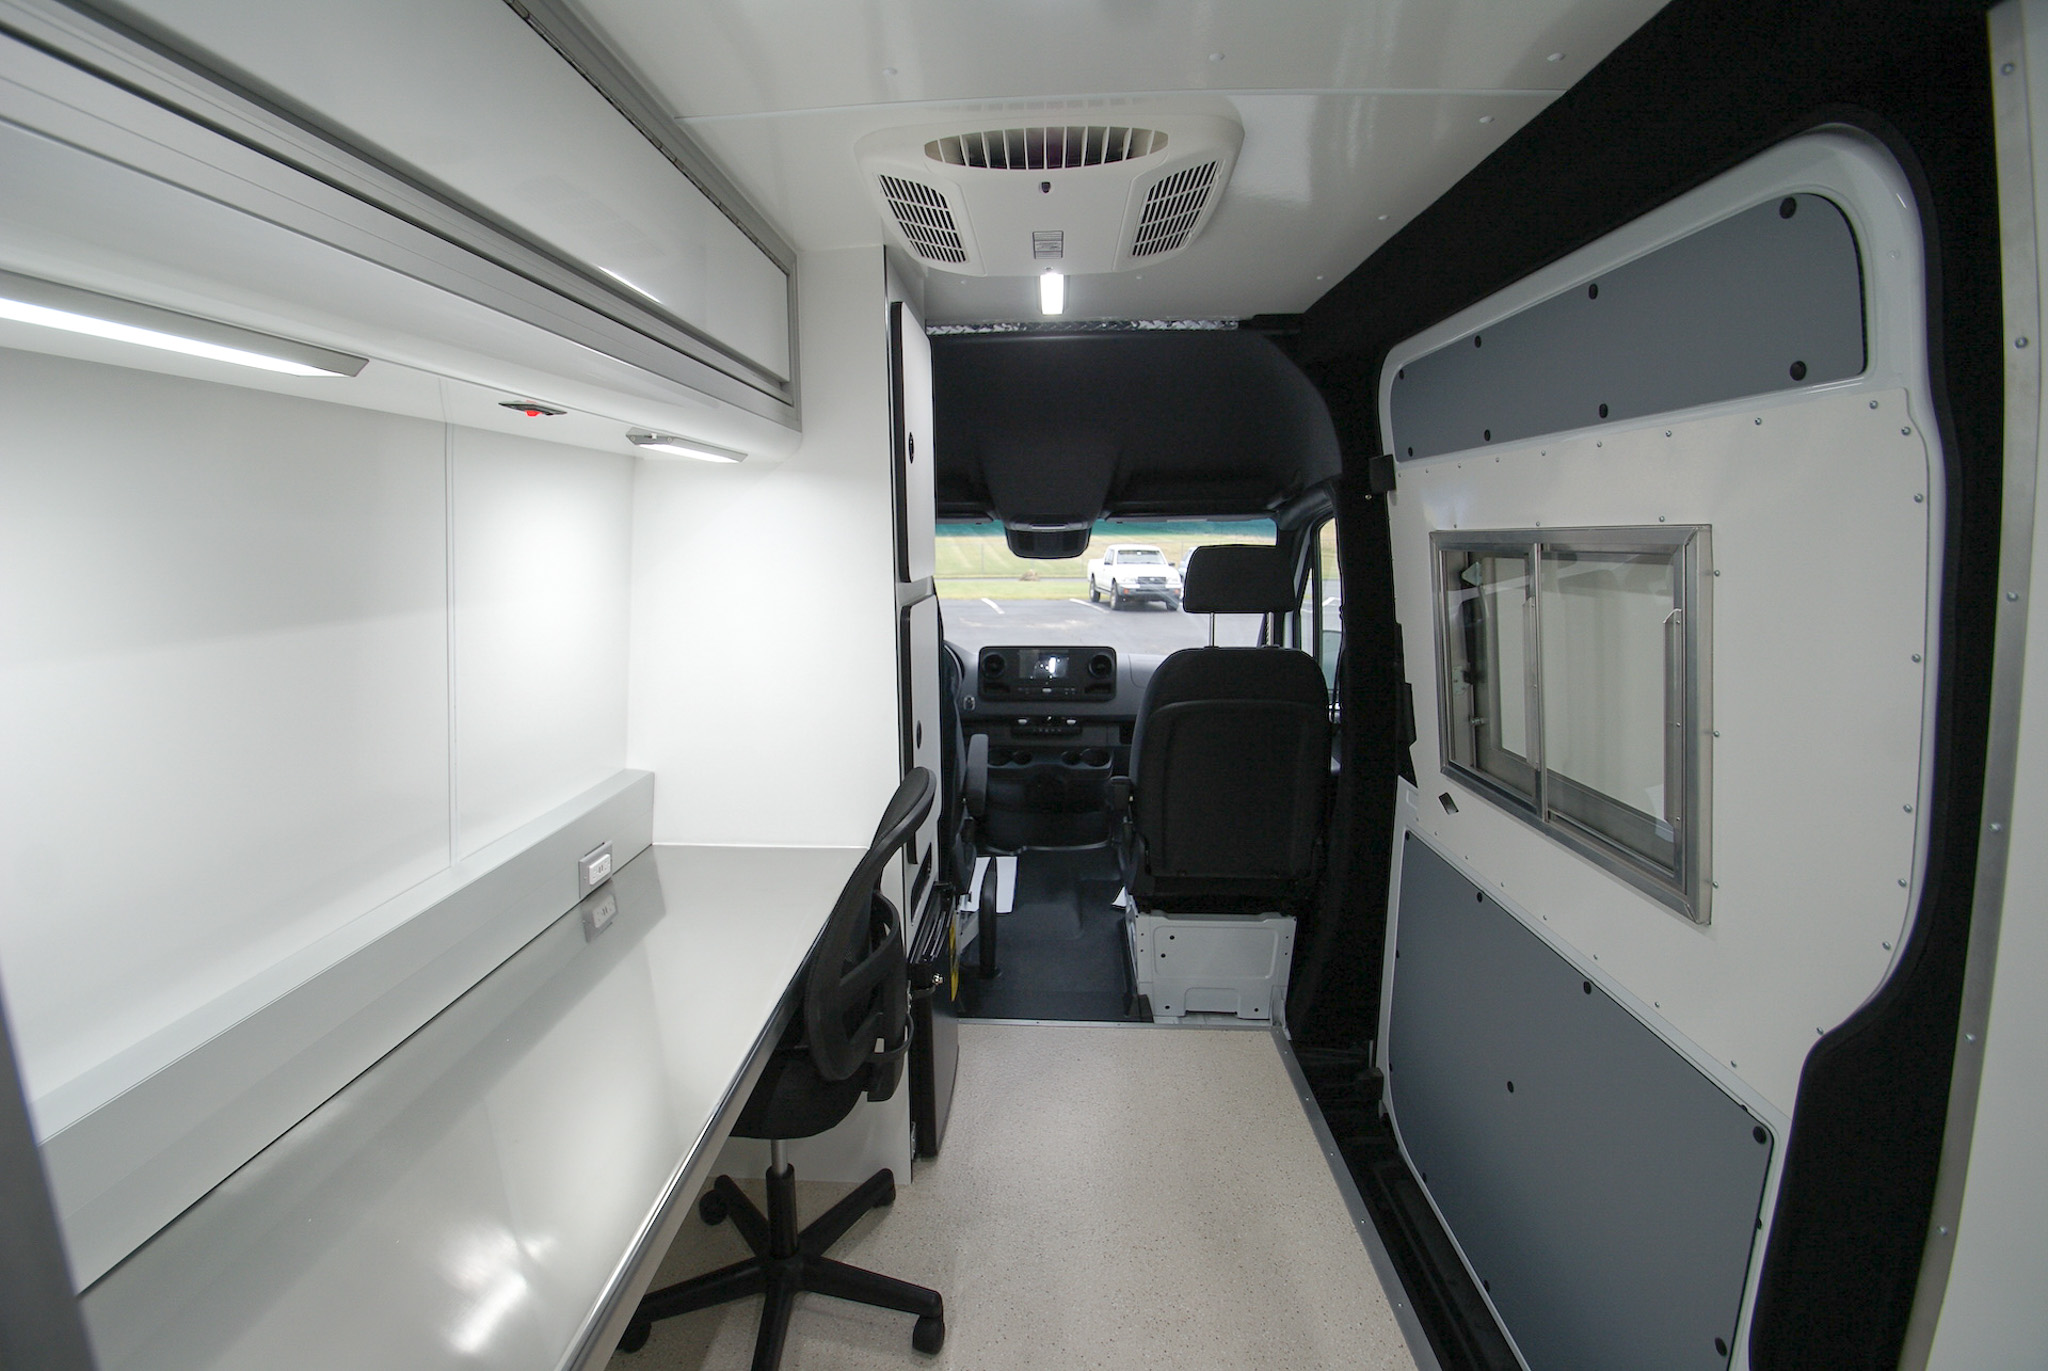 A direct view of the Mobile Immunization sprinter van's interior from the back room. There's a task chair near an open workspace, overhead cabinets, and both the driver and passenger seats up front.